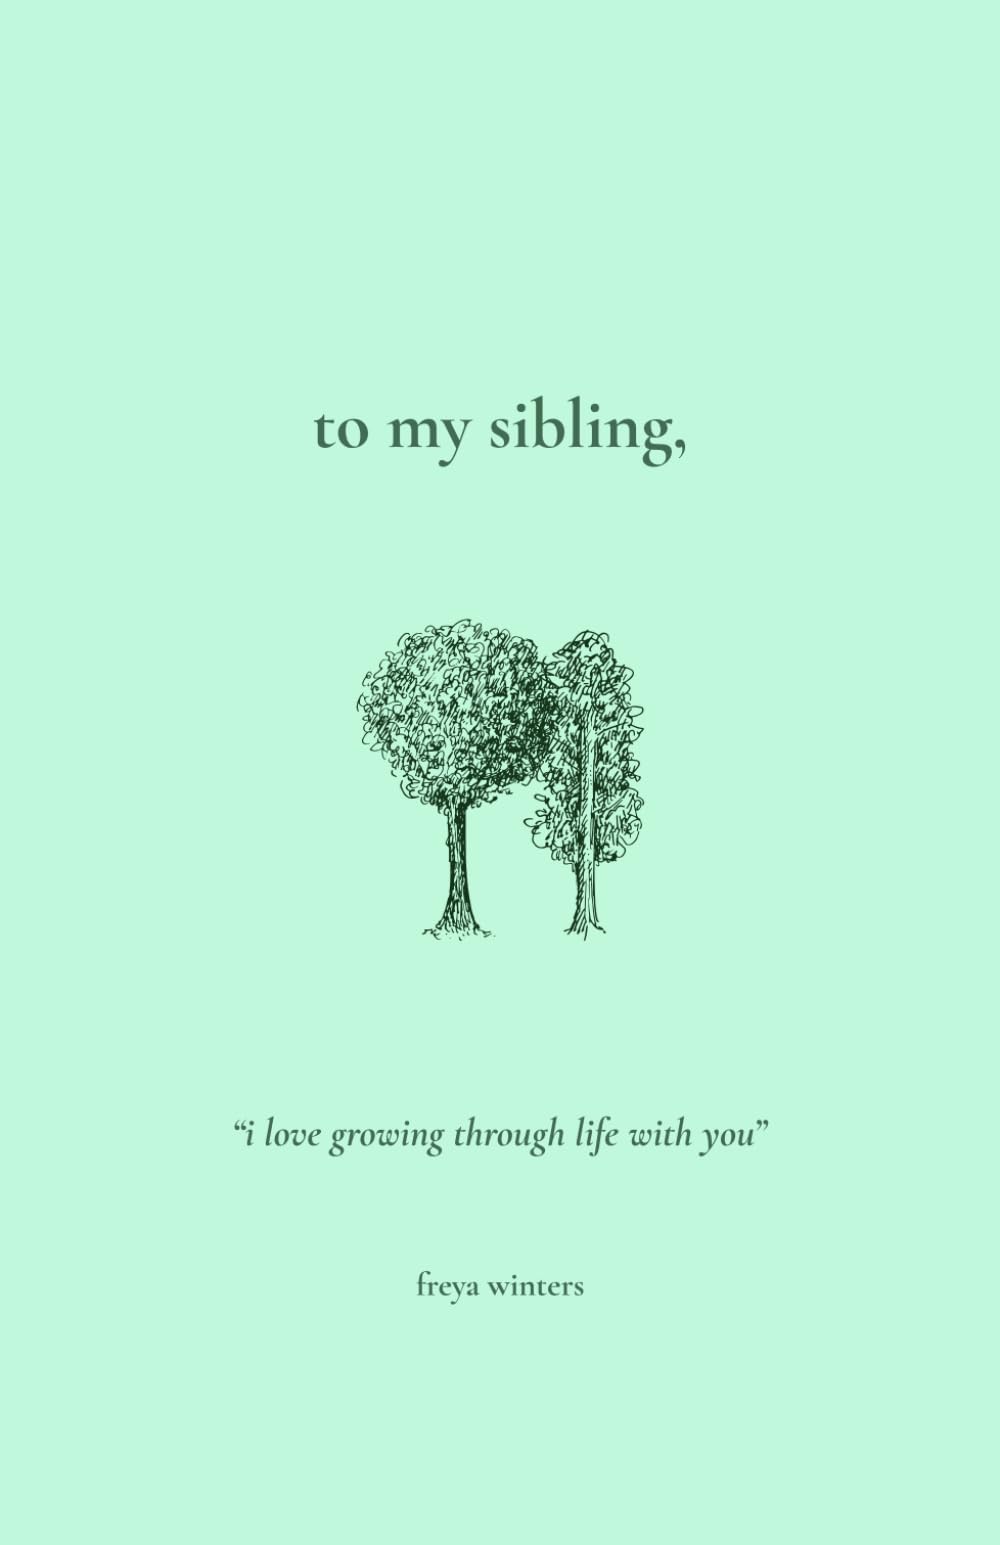 To My Sibling,